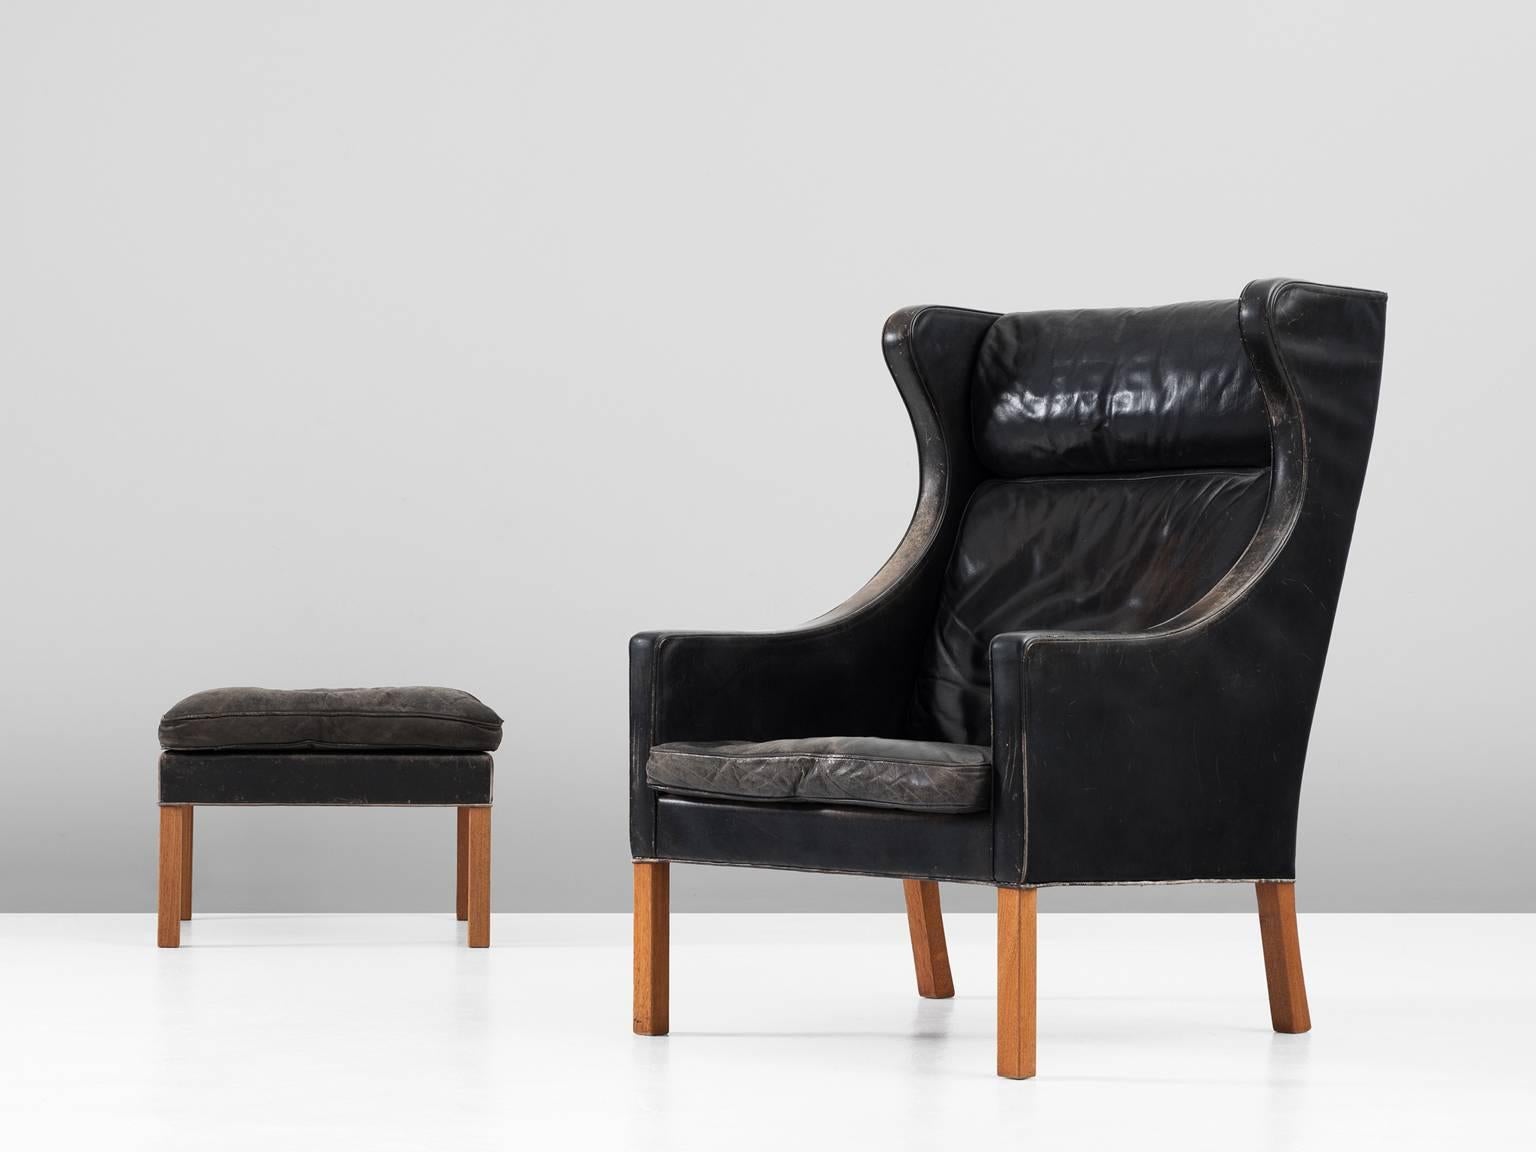 Wingback chair and ottoman model 2204, in leather and wood by Børge Mogensen for Fredericia Stolefabrik, Denmark, 1960s.

This iconic piece was designed in the 1960s. It shows the clear lines and great craftsmanship that characterize Mogensen's